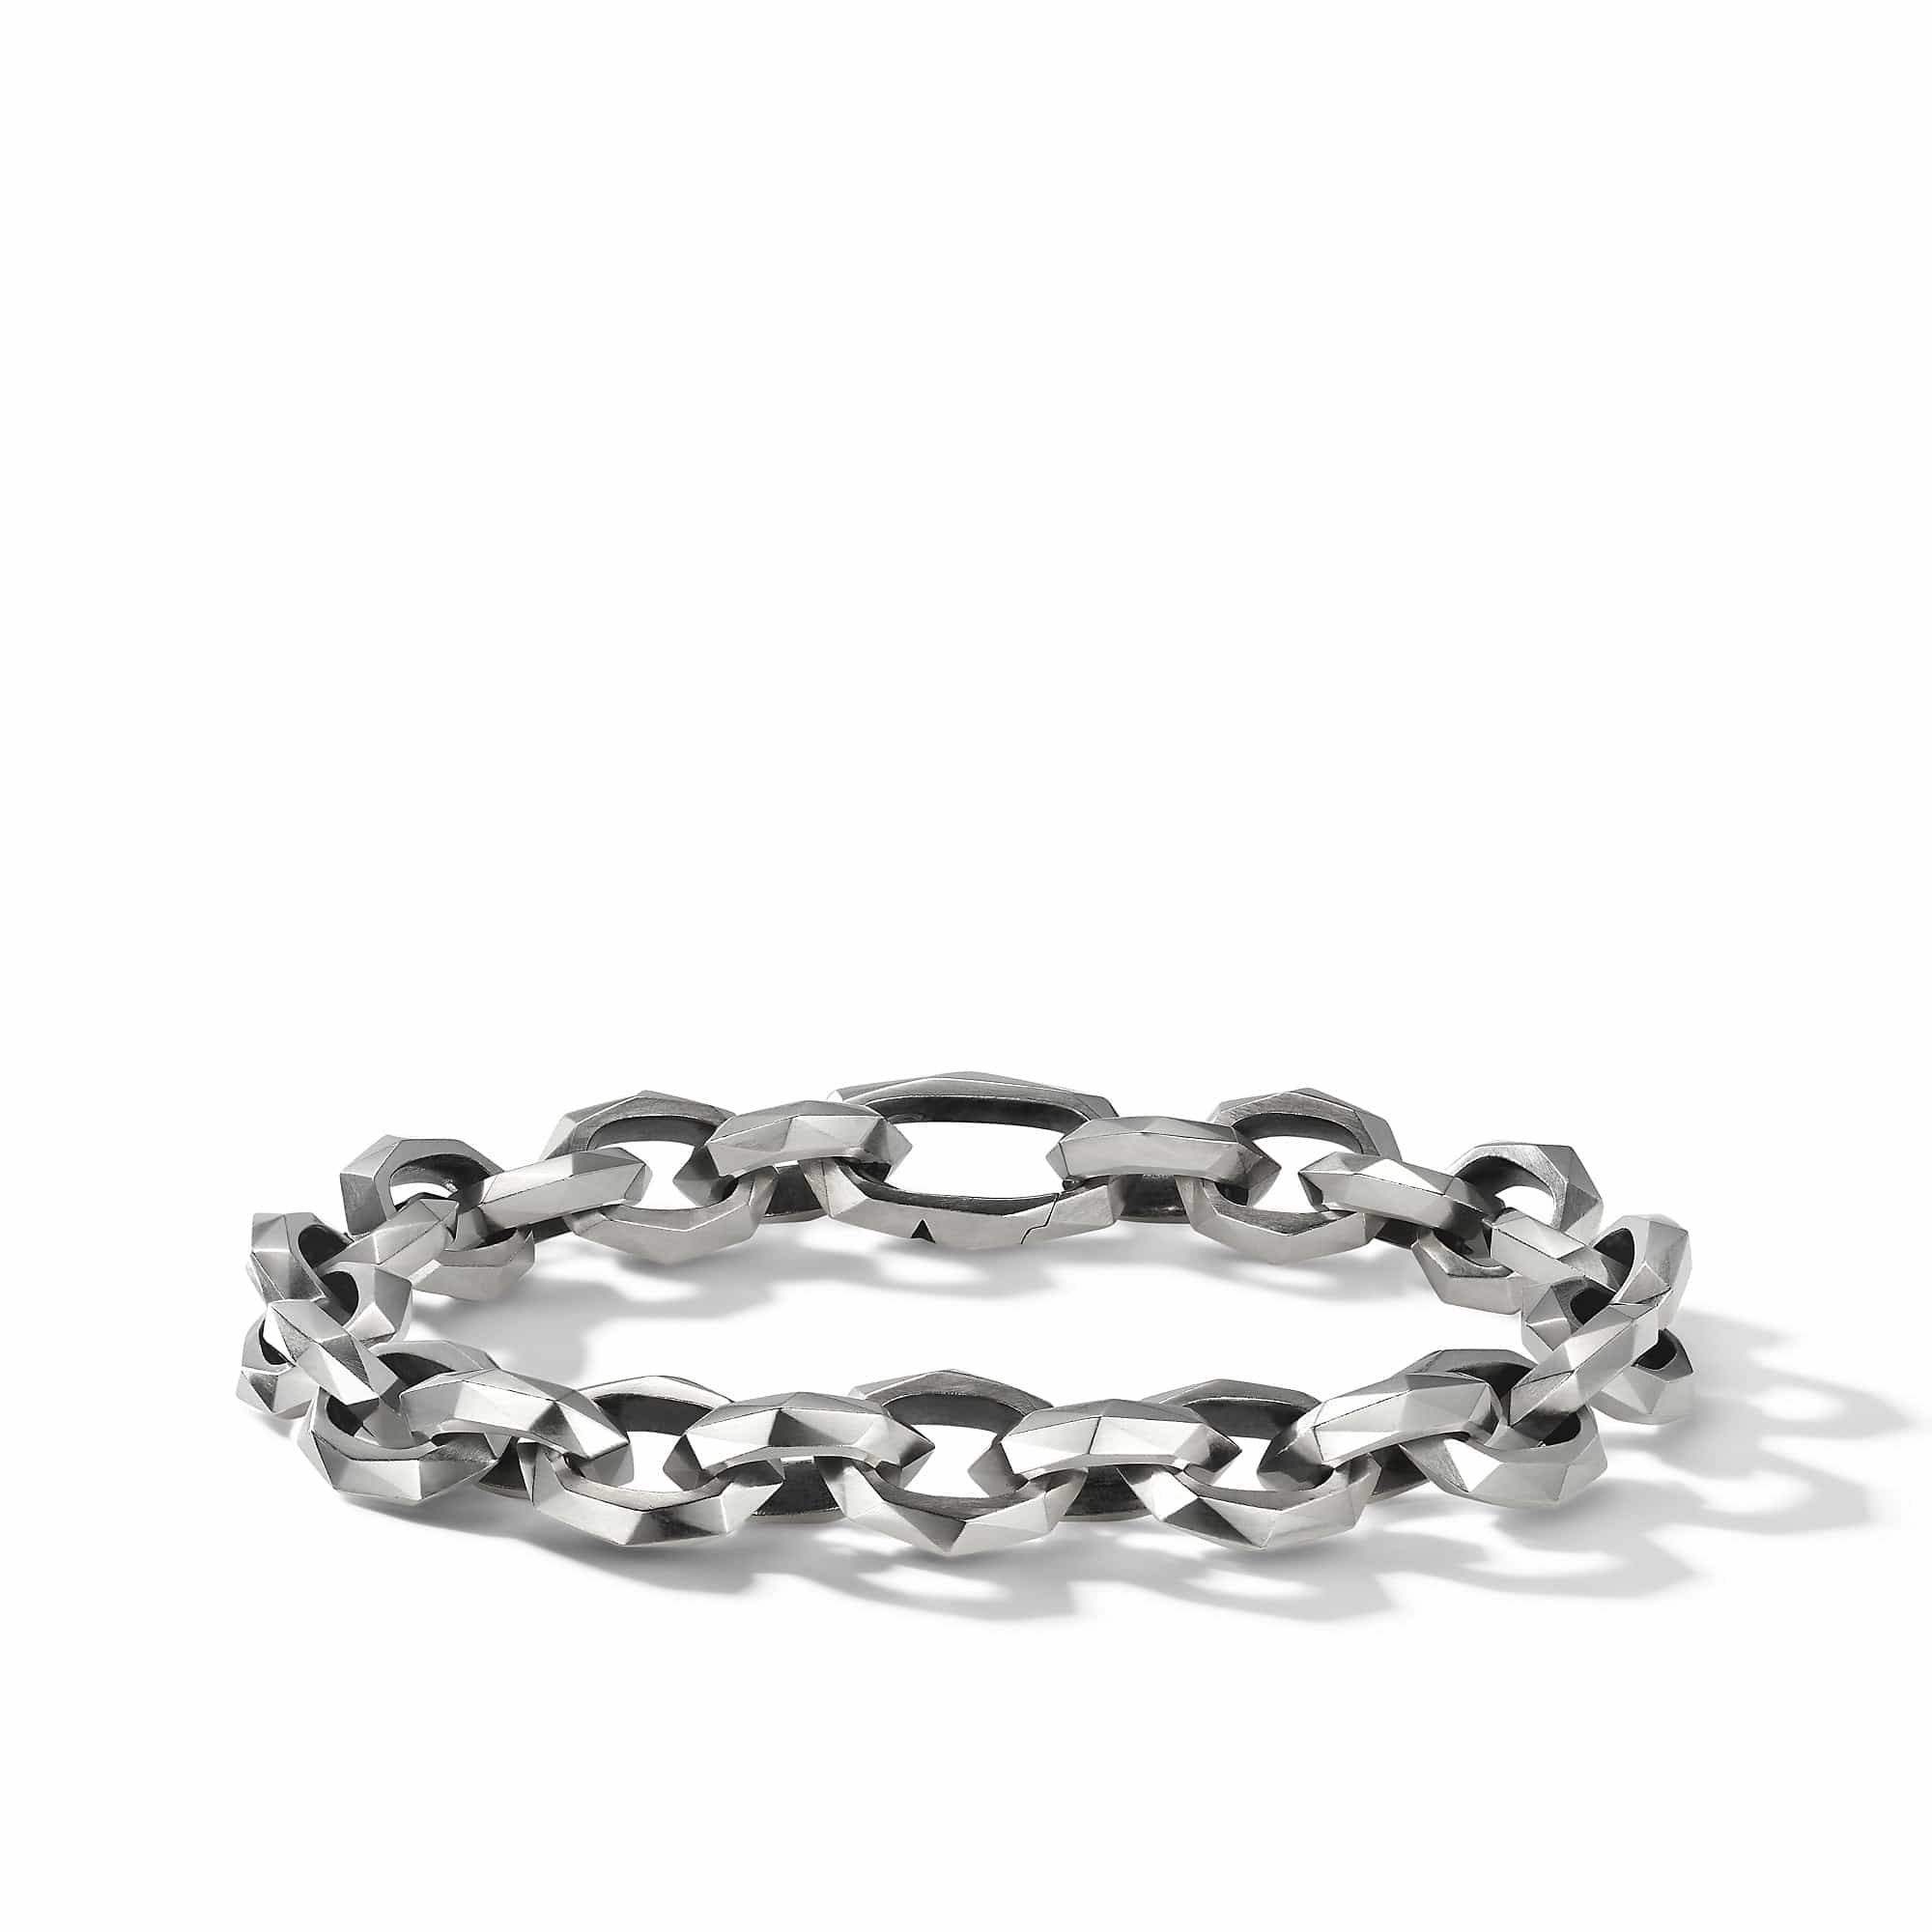 Torqued Faceted Chain Link Bracelet in Sterling Silver